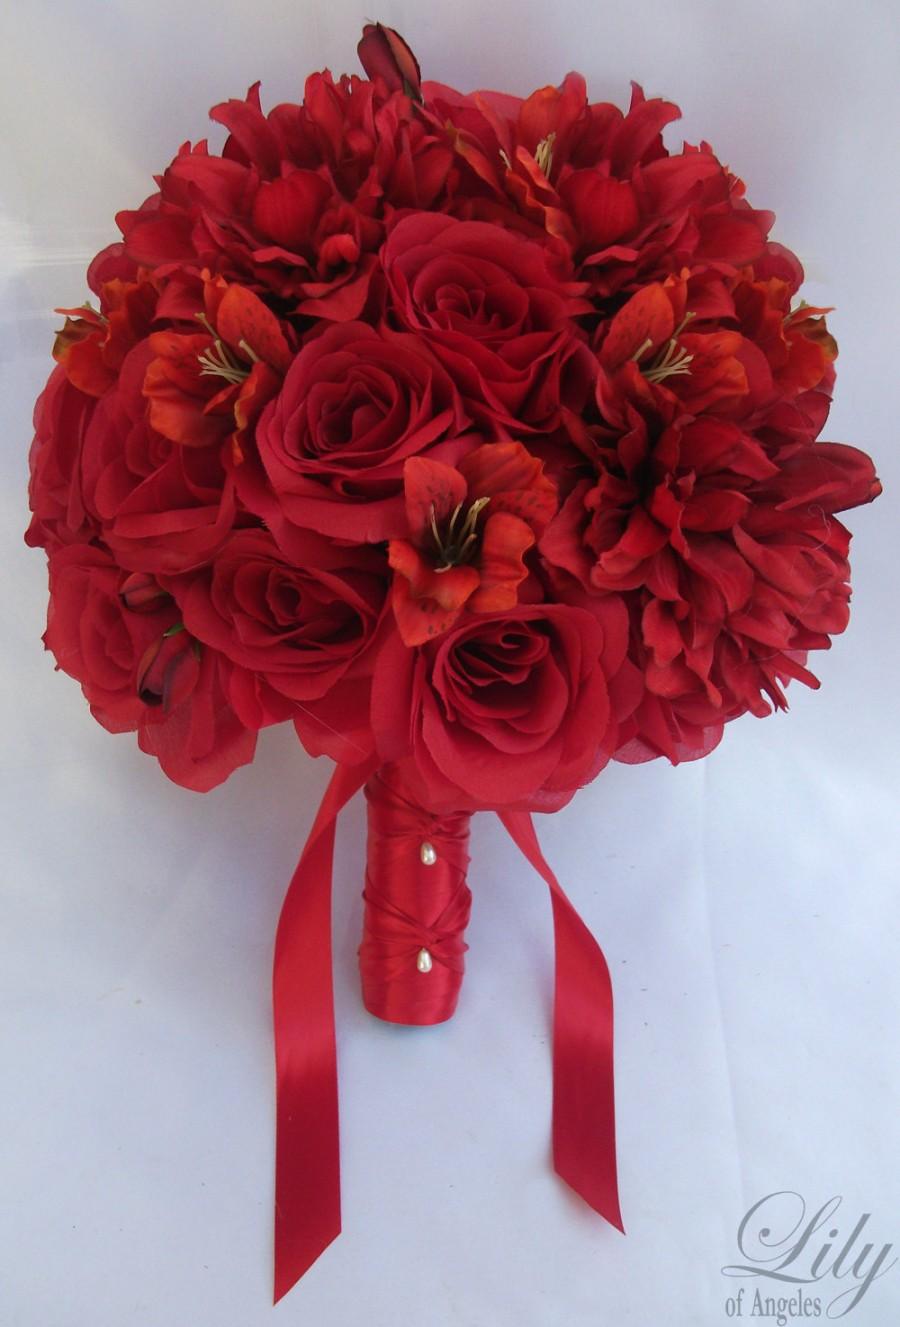 Mariage - 17 Piece Package Wedding Bridal Bride Maid Of Honor Bridesmaid Bouquet Boutonniere Corsage Silk Flower APPLE RED "Lily of Angeles" RERE03